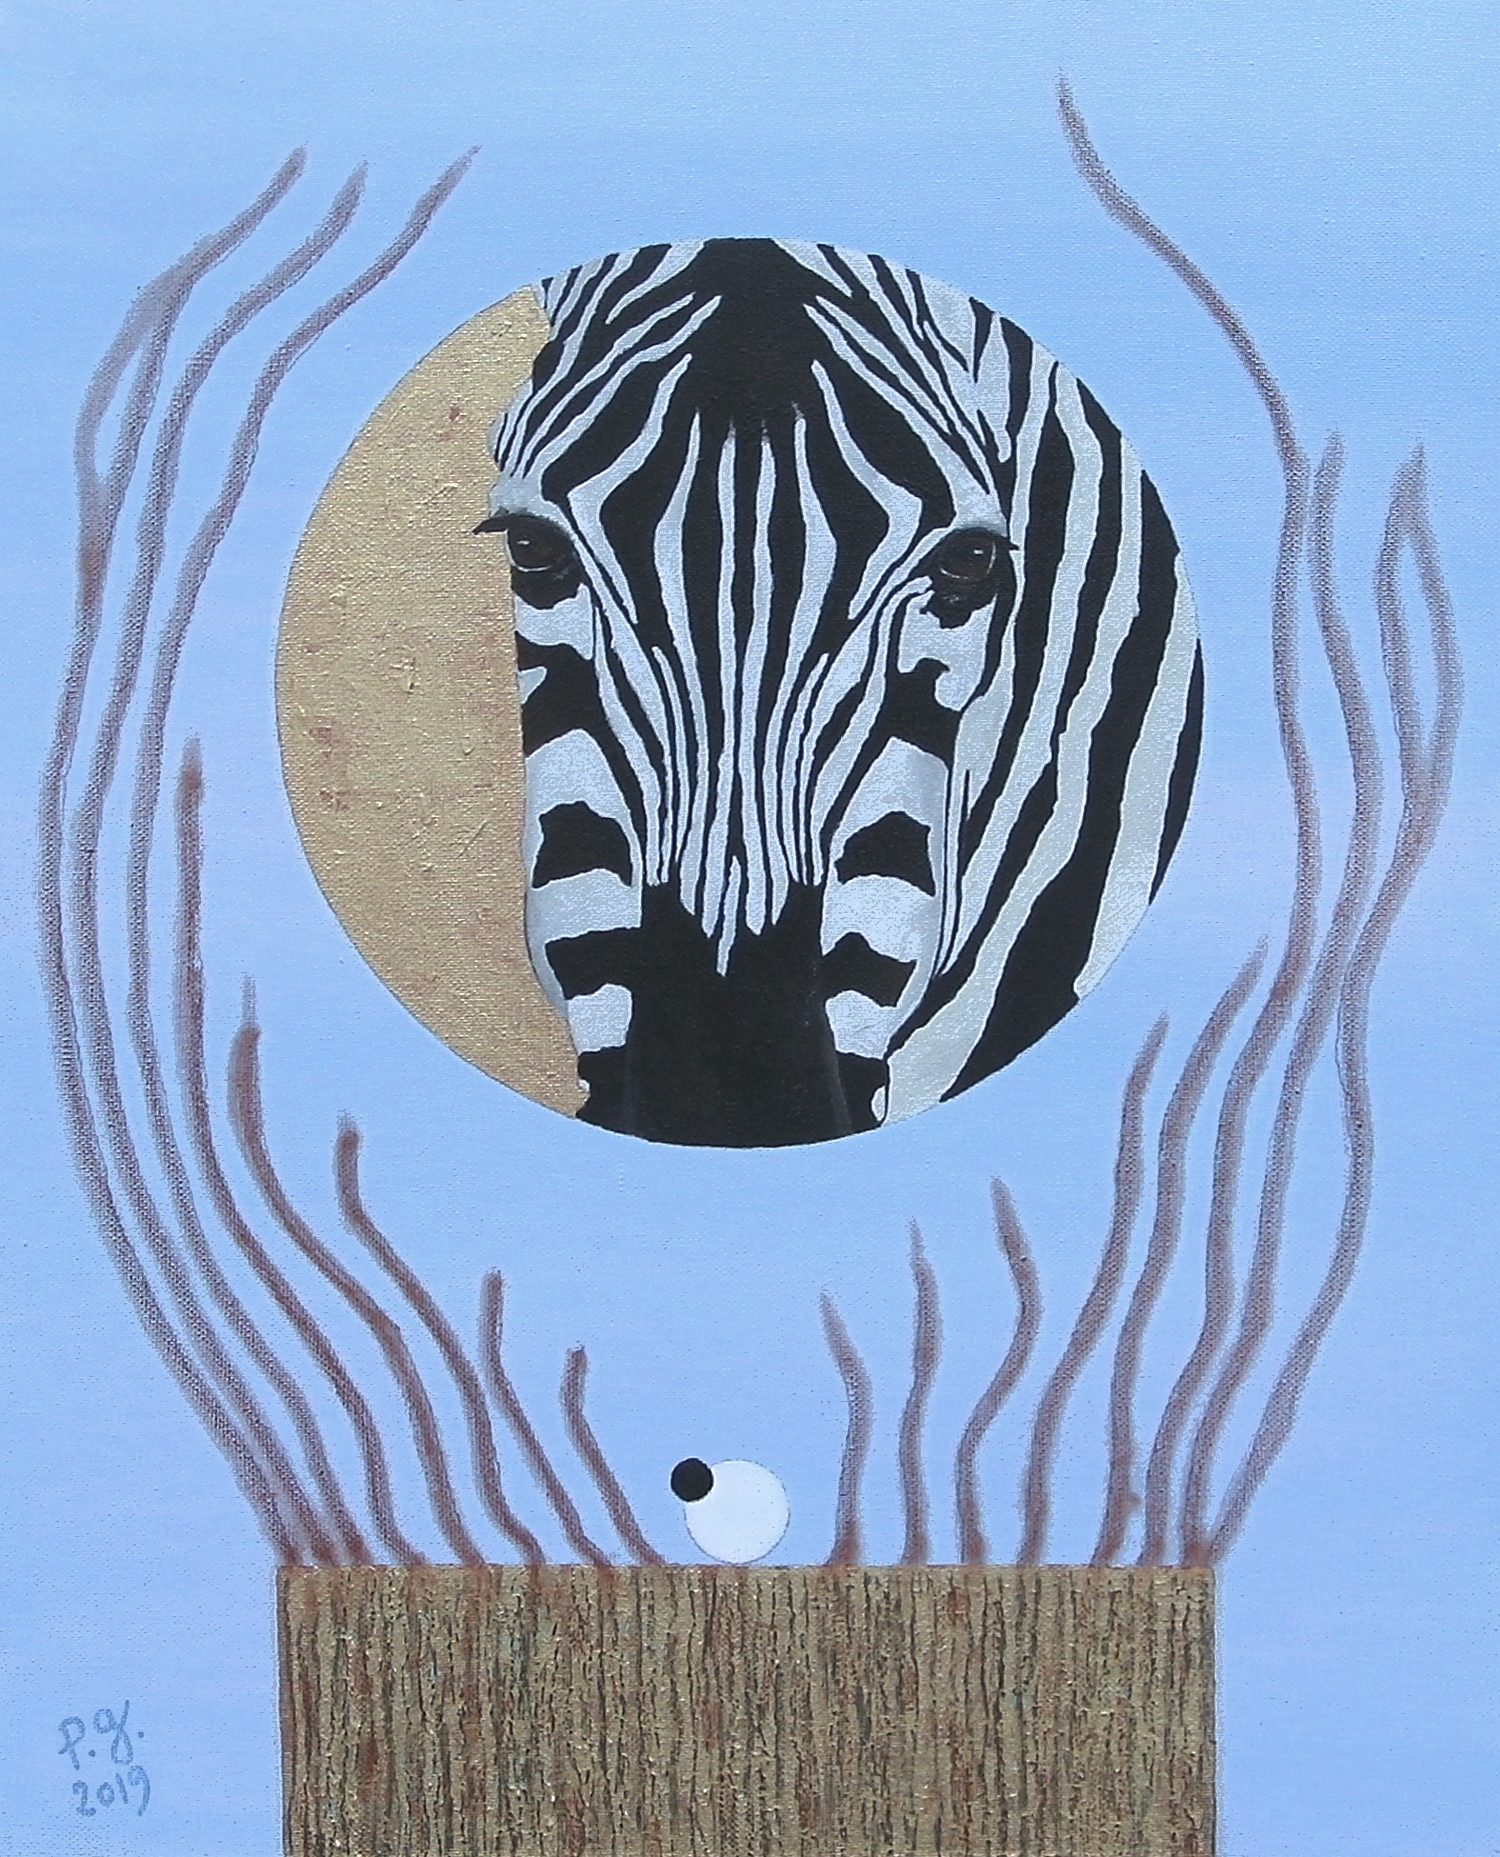 patrick gourgouillat - "Zebra And A Few Pieces Of String [Animals]" - 2019